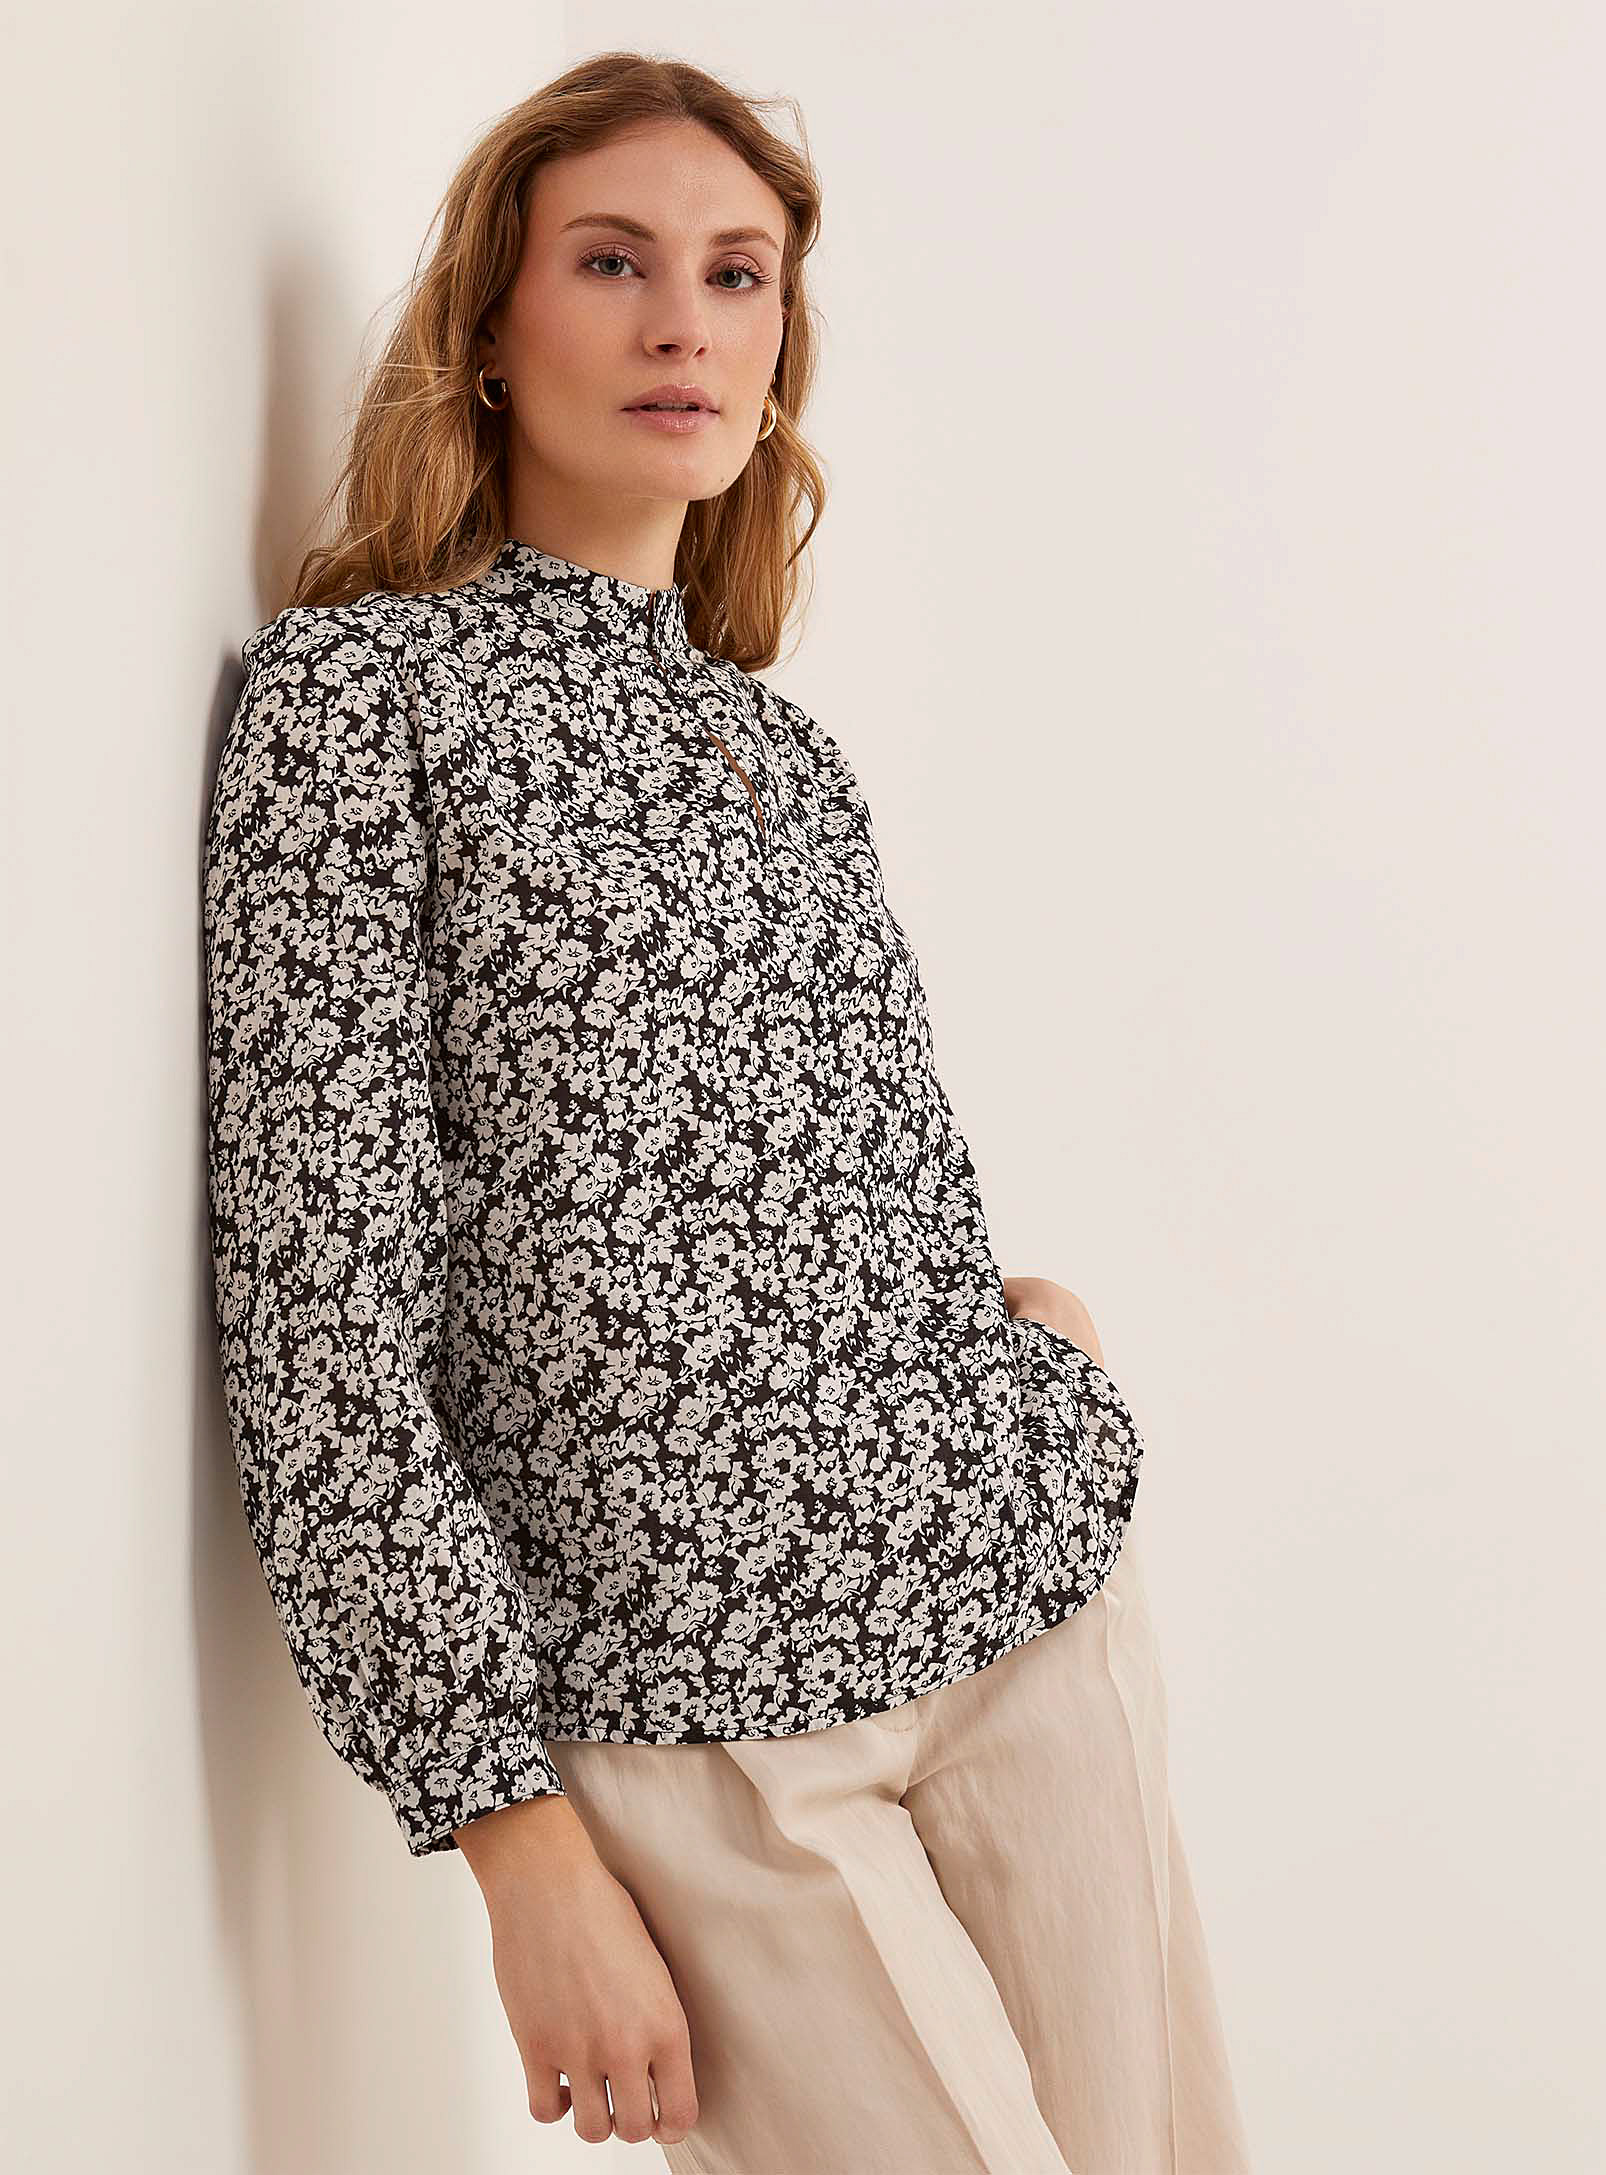 Marc O'polo Bright Garden Lightweight Blouse In Black And White